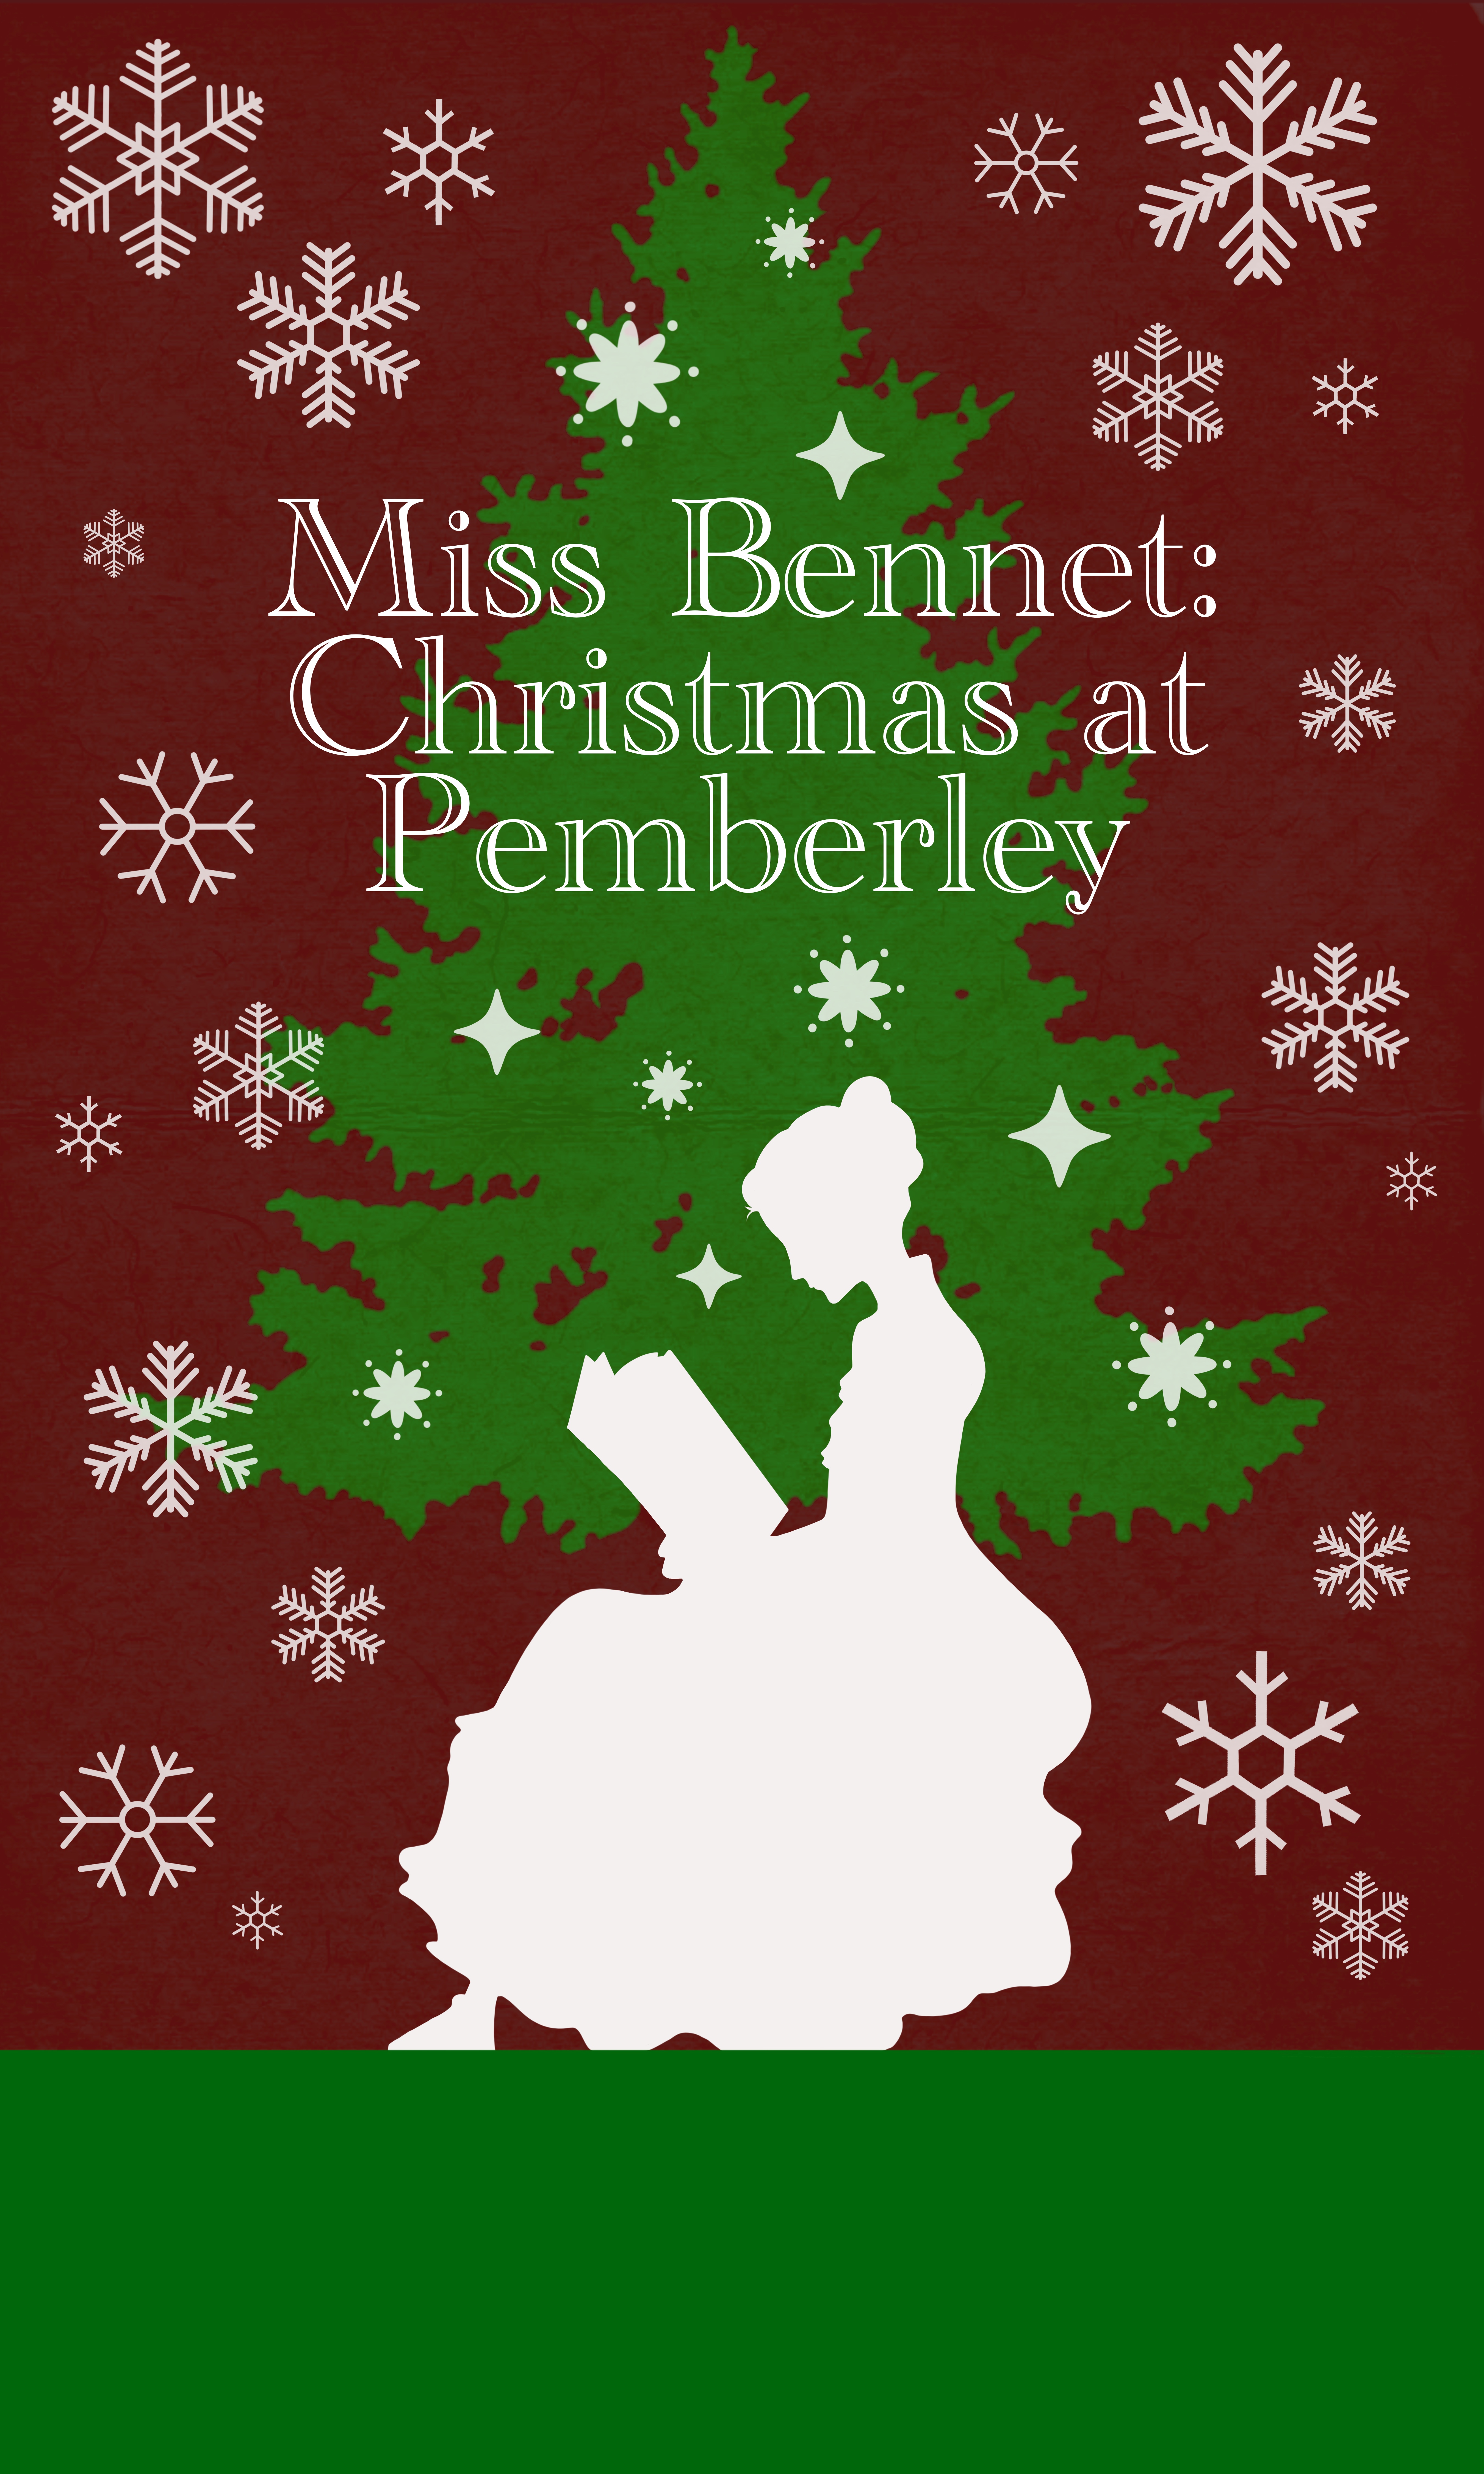 Ms Bennet Christmas at Pemberley image